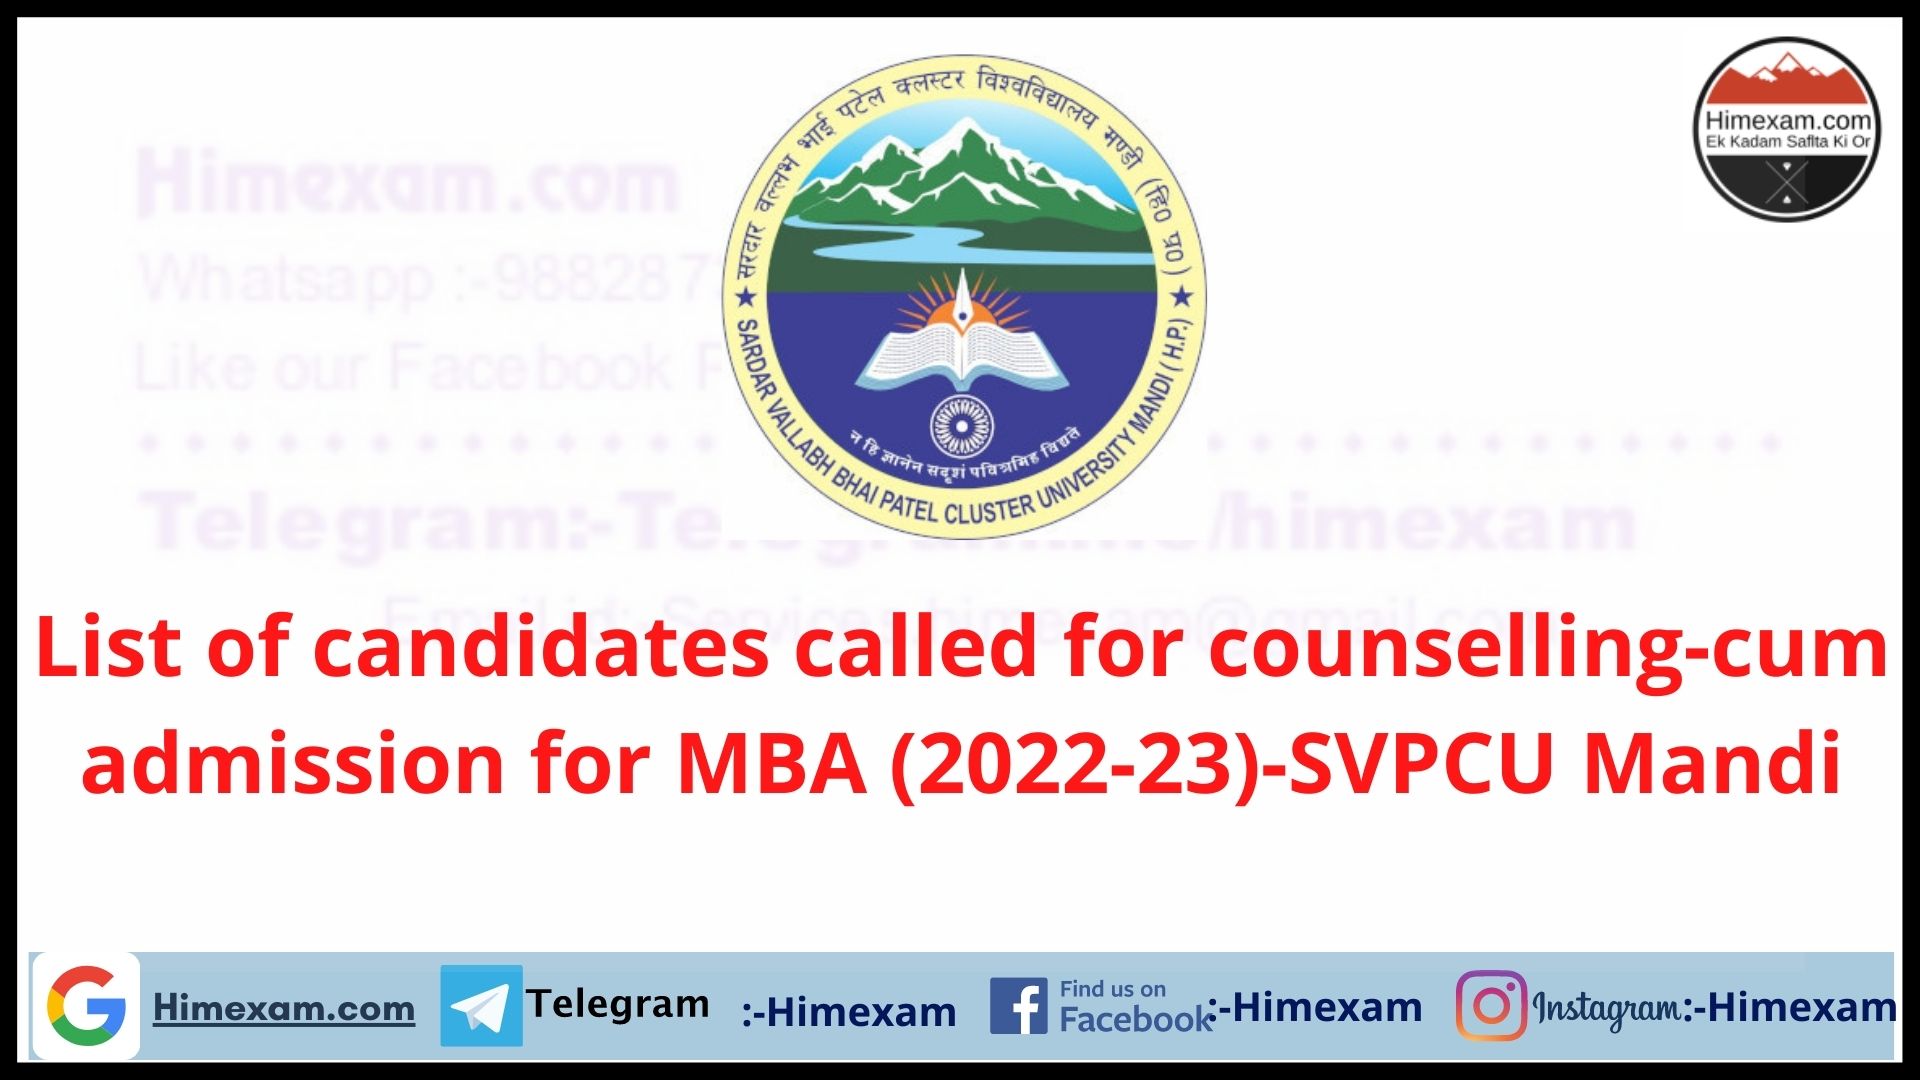 List of candidates called for counselling-cum admission for MBA (2022-23)-SVPCU Mandi